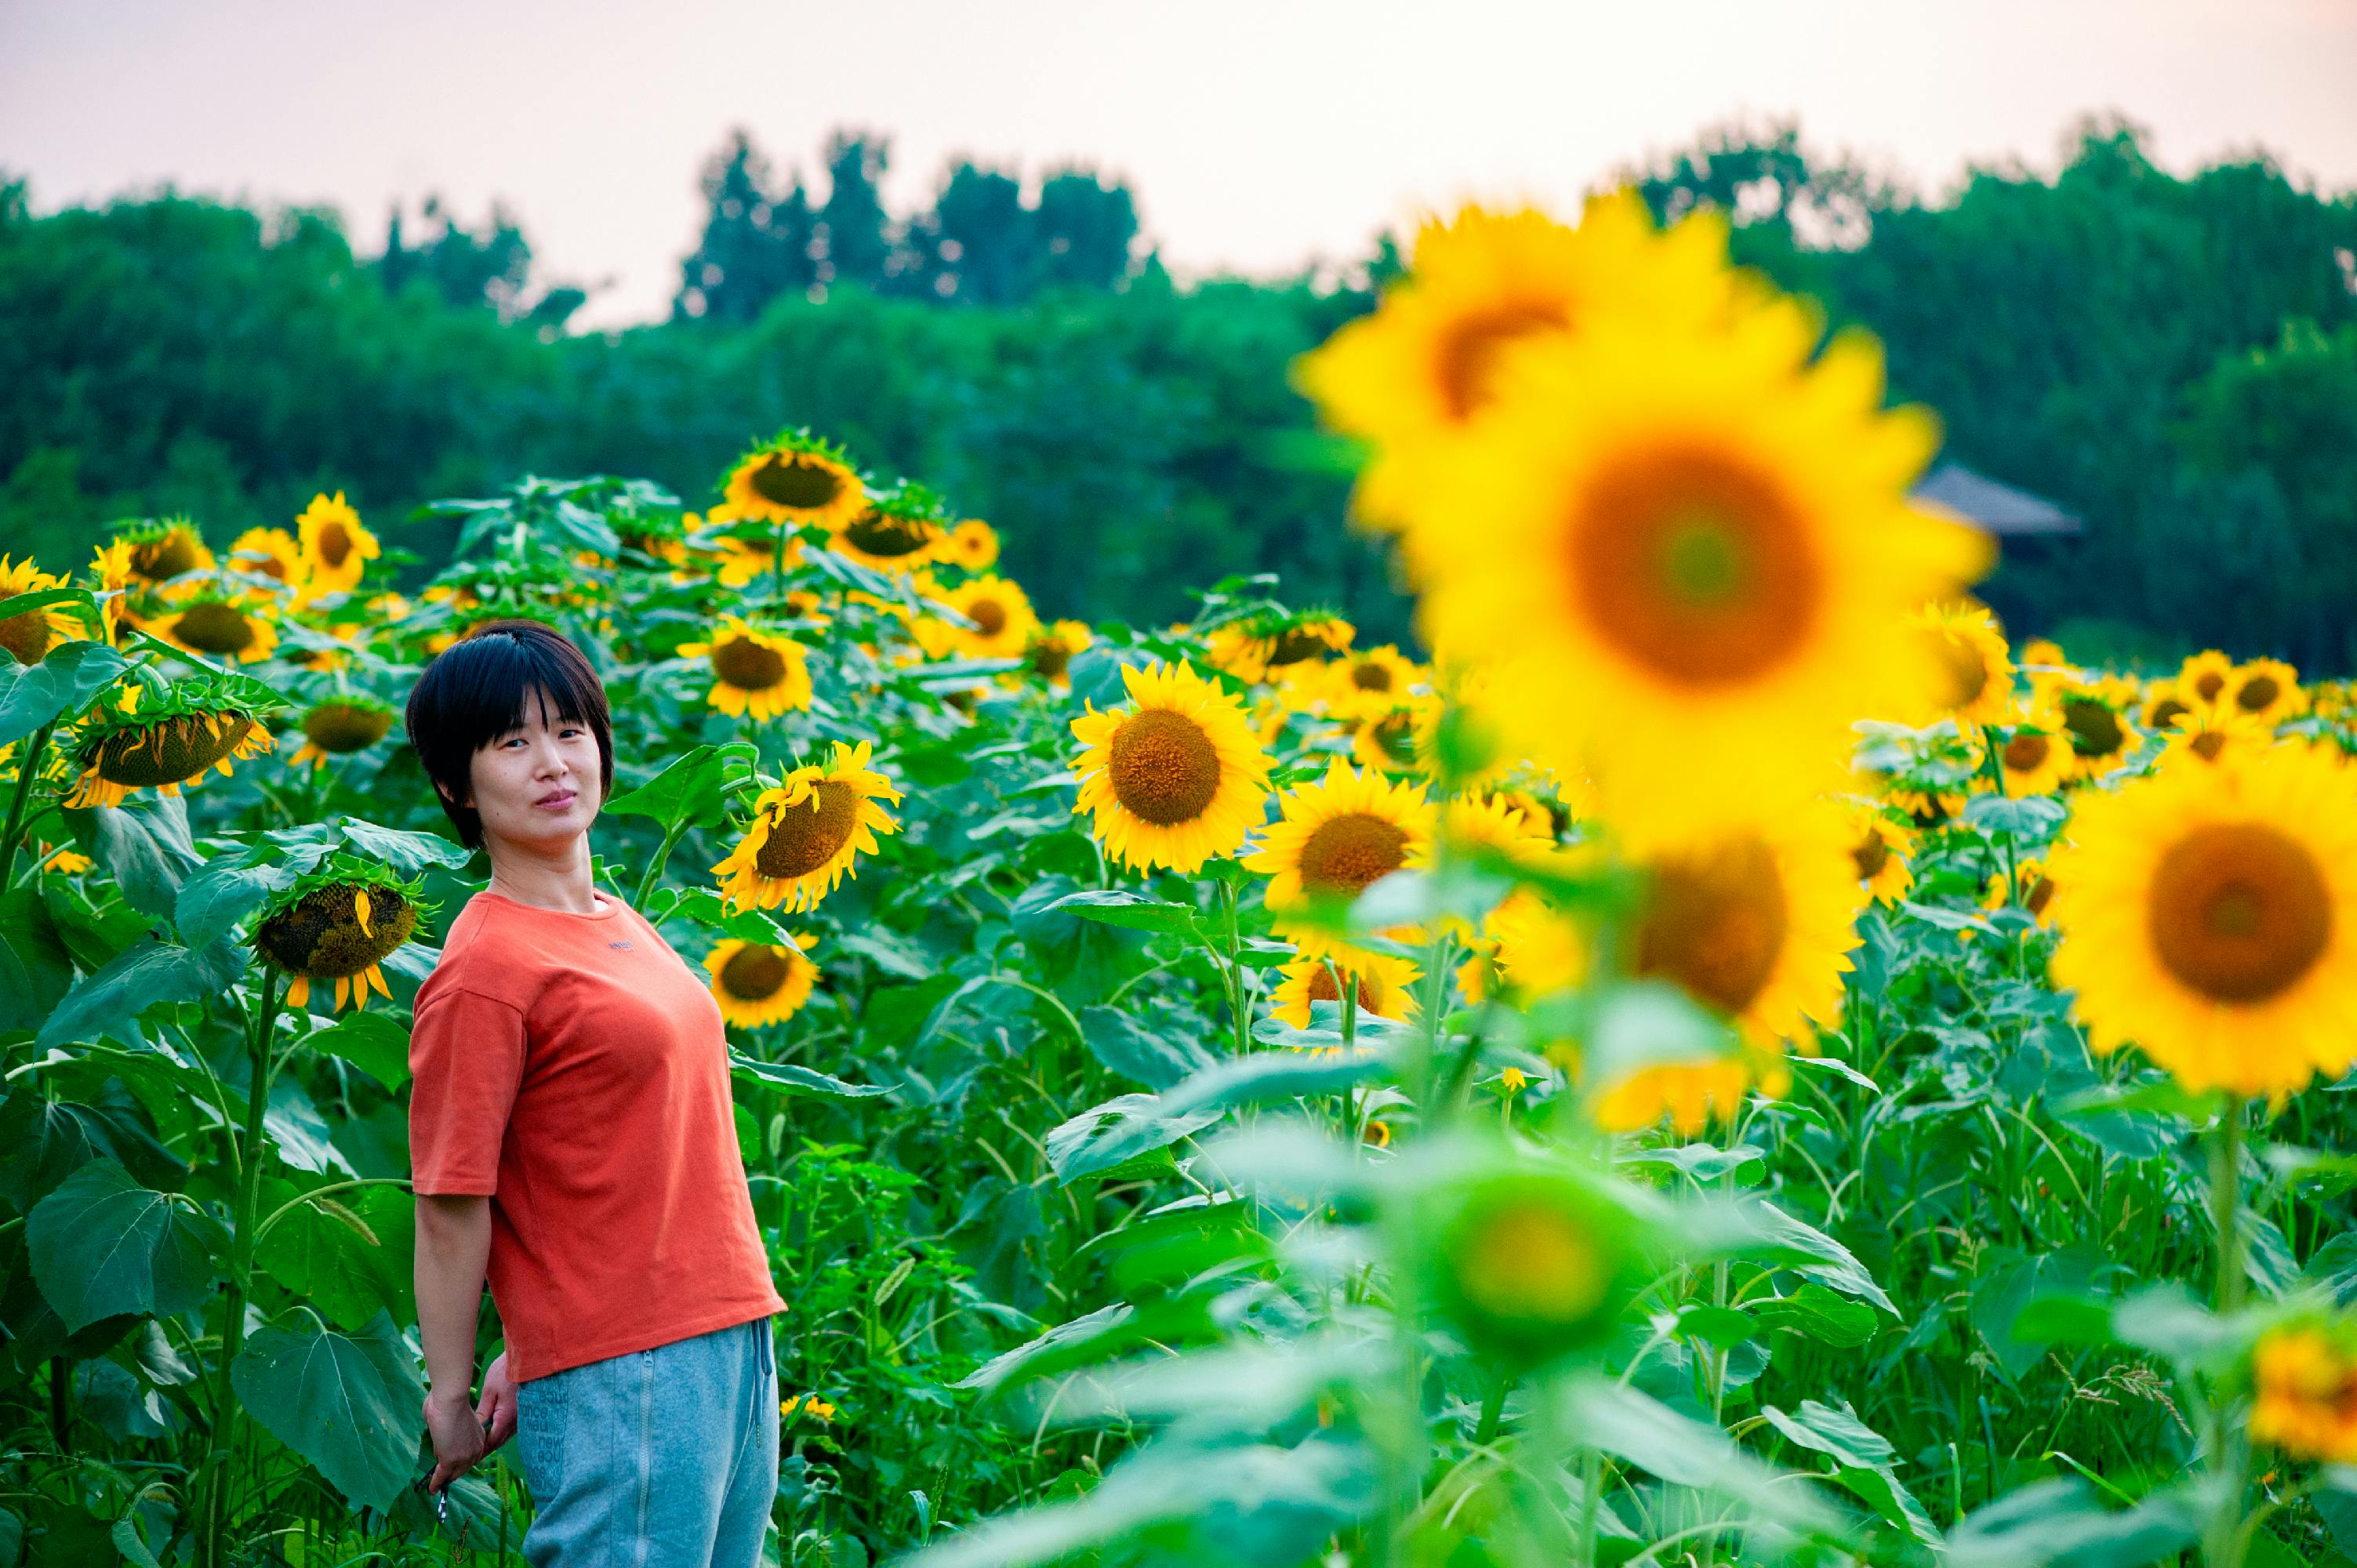 Little Girl with Sunflower in a Sunflower Field Free Stock Photo | picjumbo